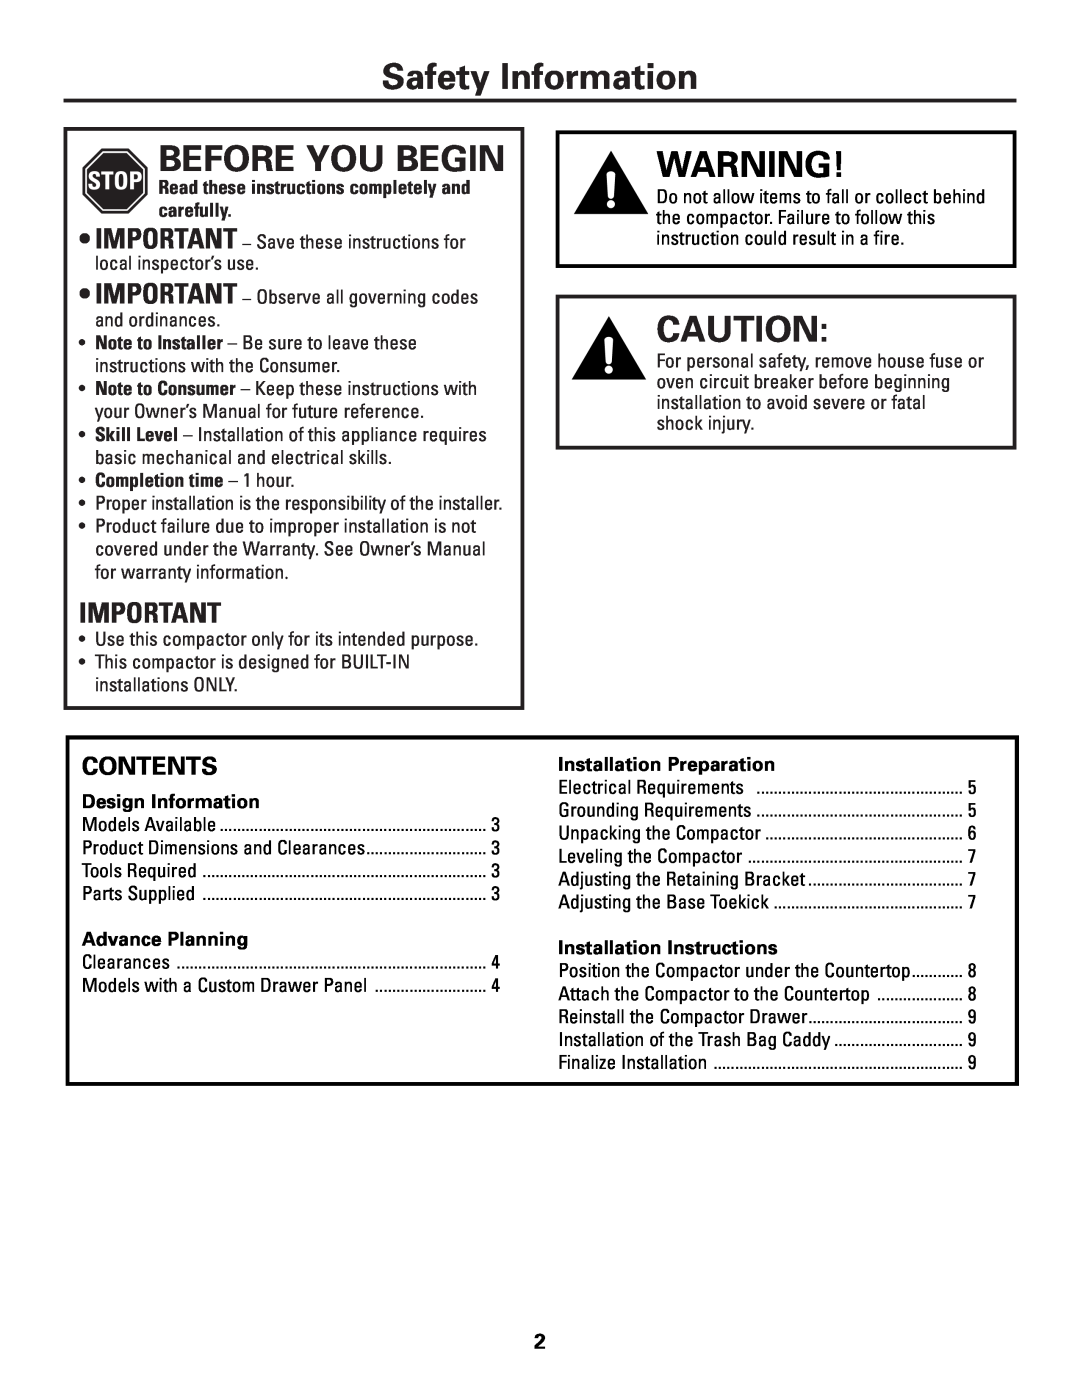 GE GCG1500 WW, GCG1700 II Safety Information, Before You Begin, Contents, Read these instructions completely and carefully 